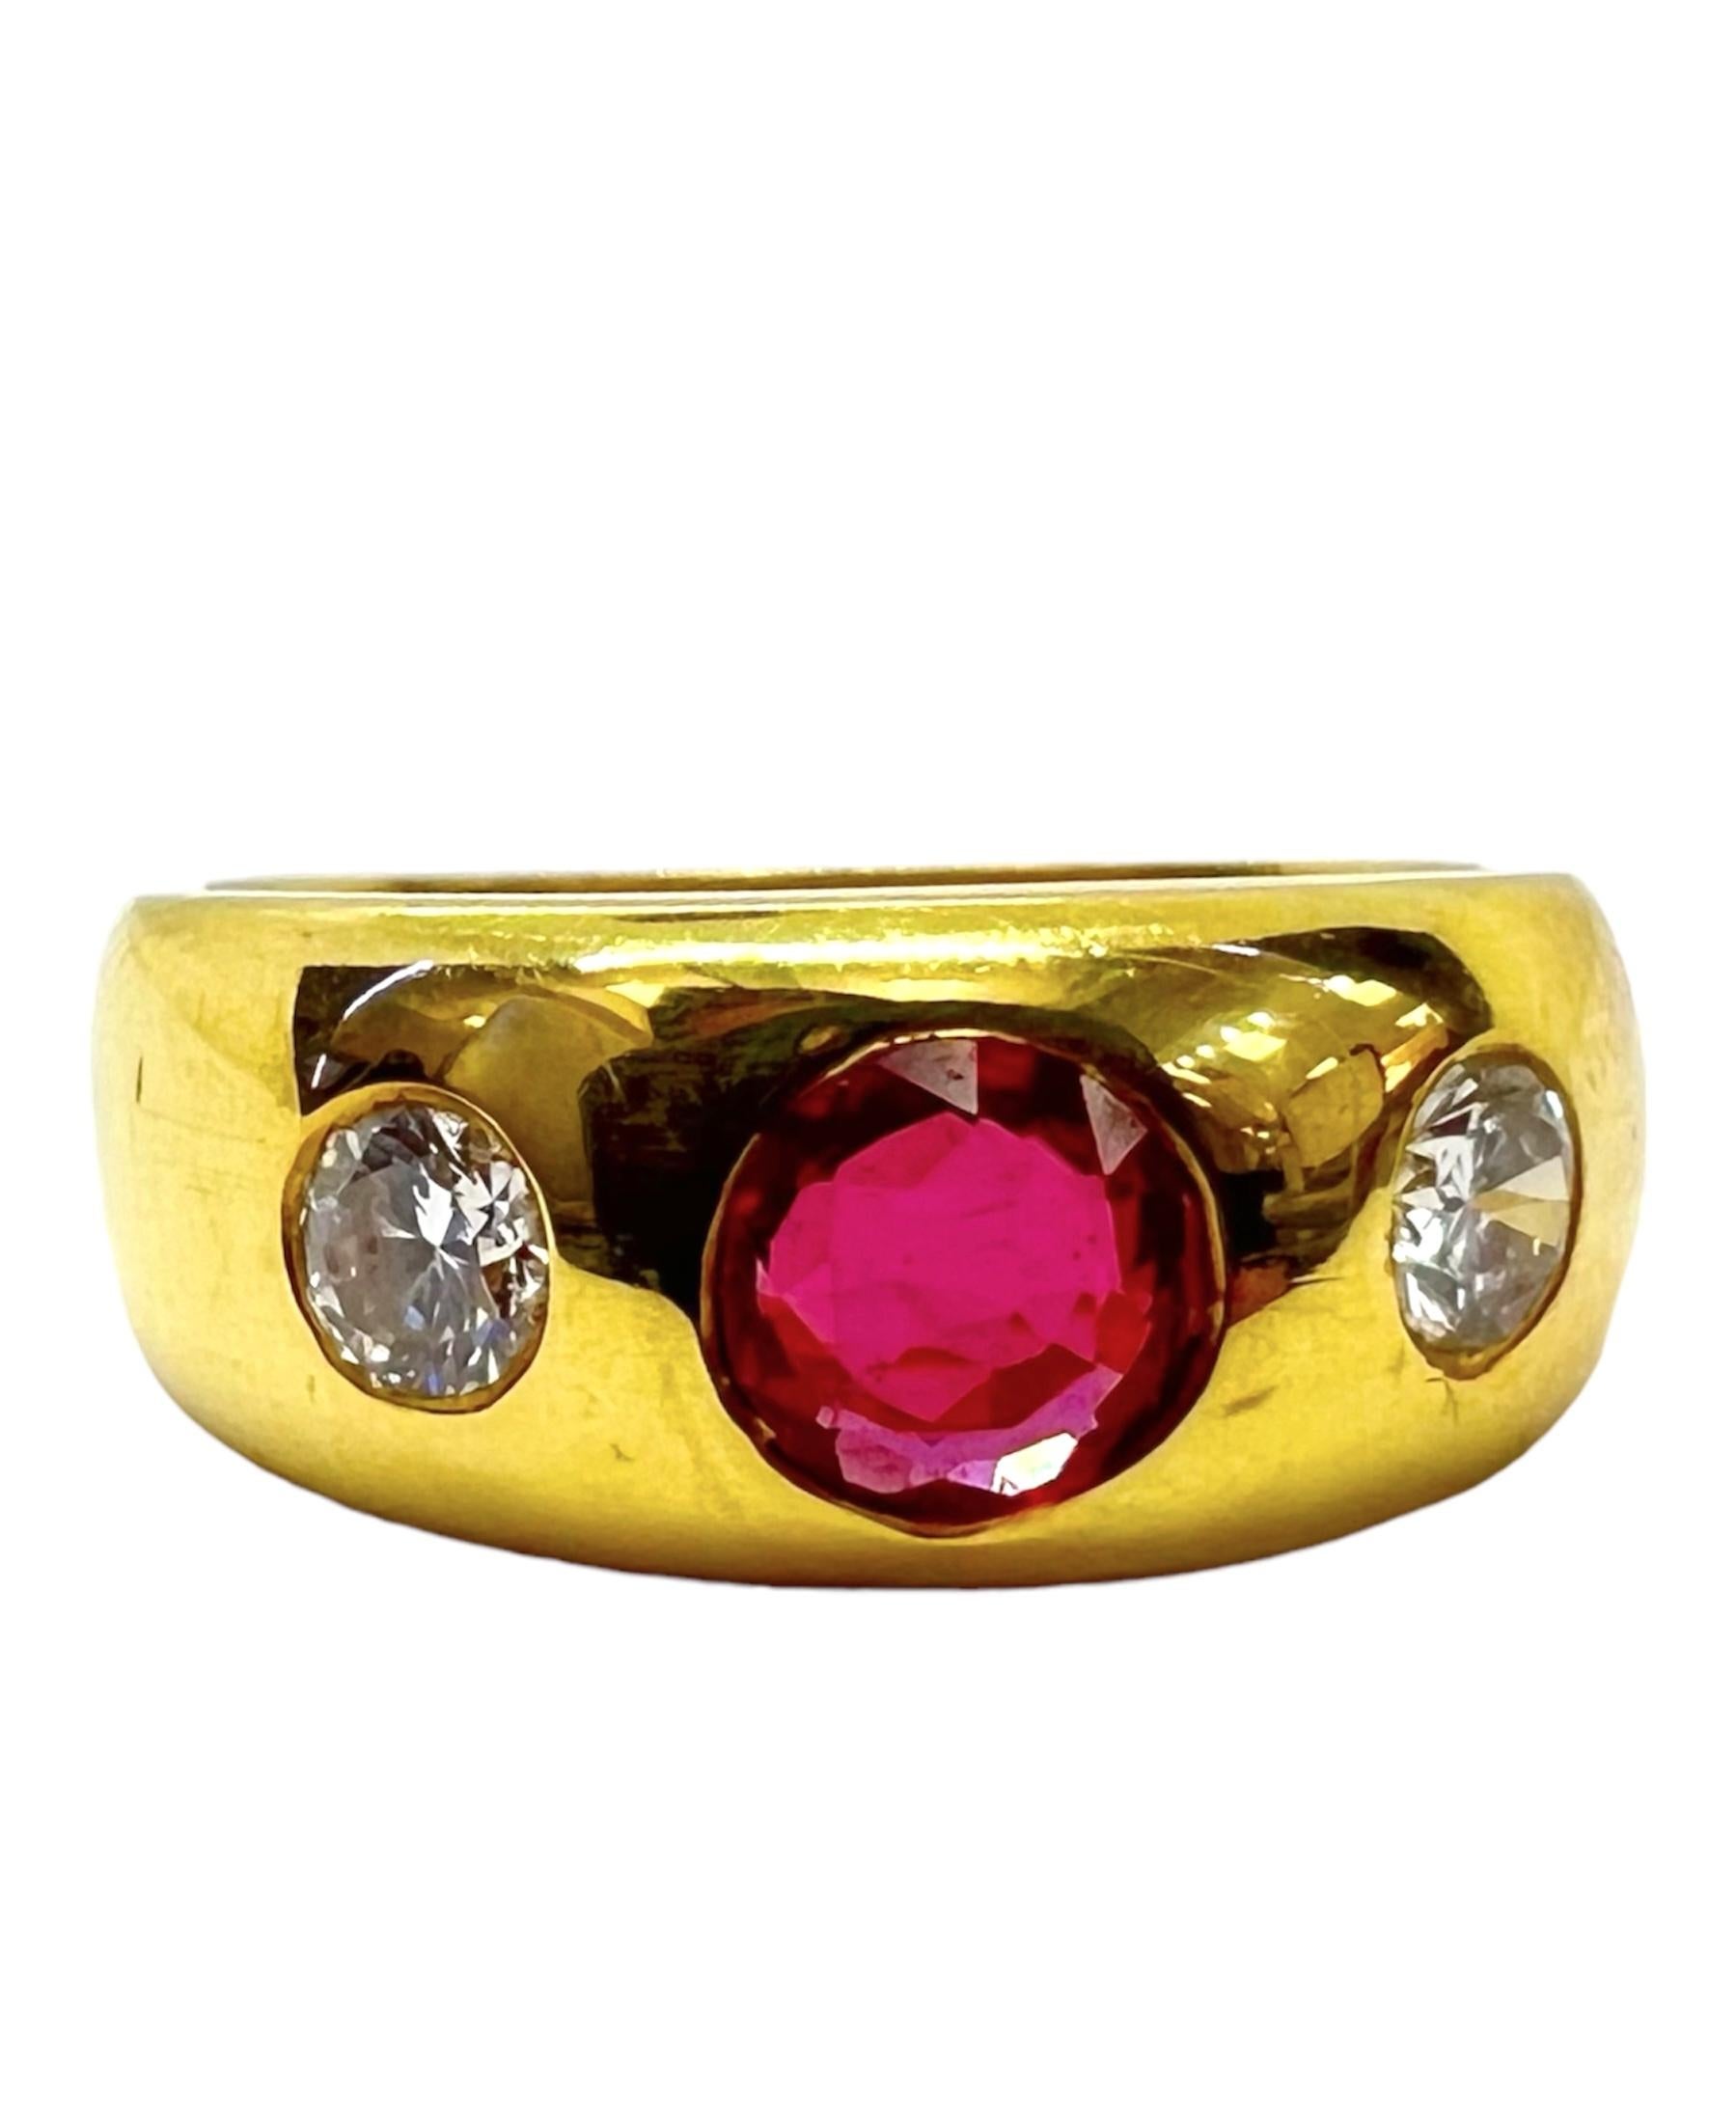 18K yellow gold ring with 2 round cut diamond and ruby.

Sophia D by Joseph Dardashti LTD has been known worldwide for 35 years and are inspired by classic Art Deco design that merges with modern manufacturing techniques. 